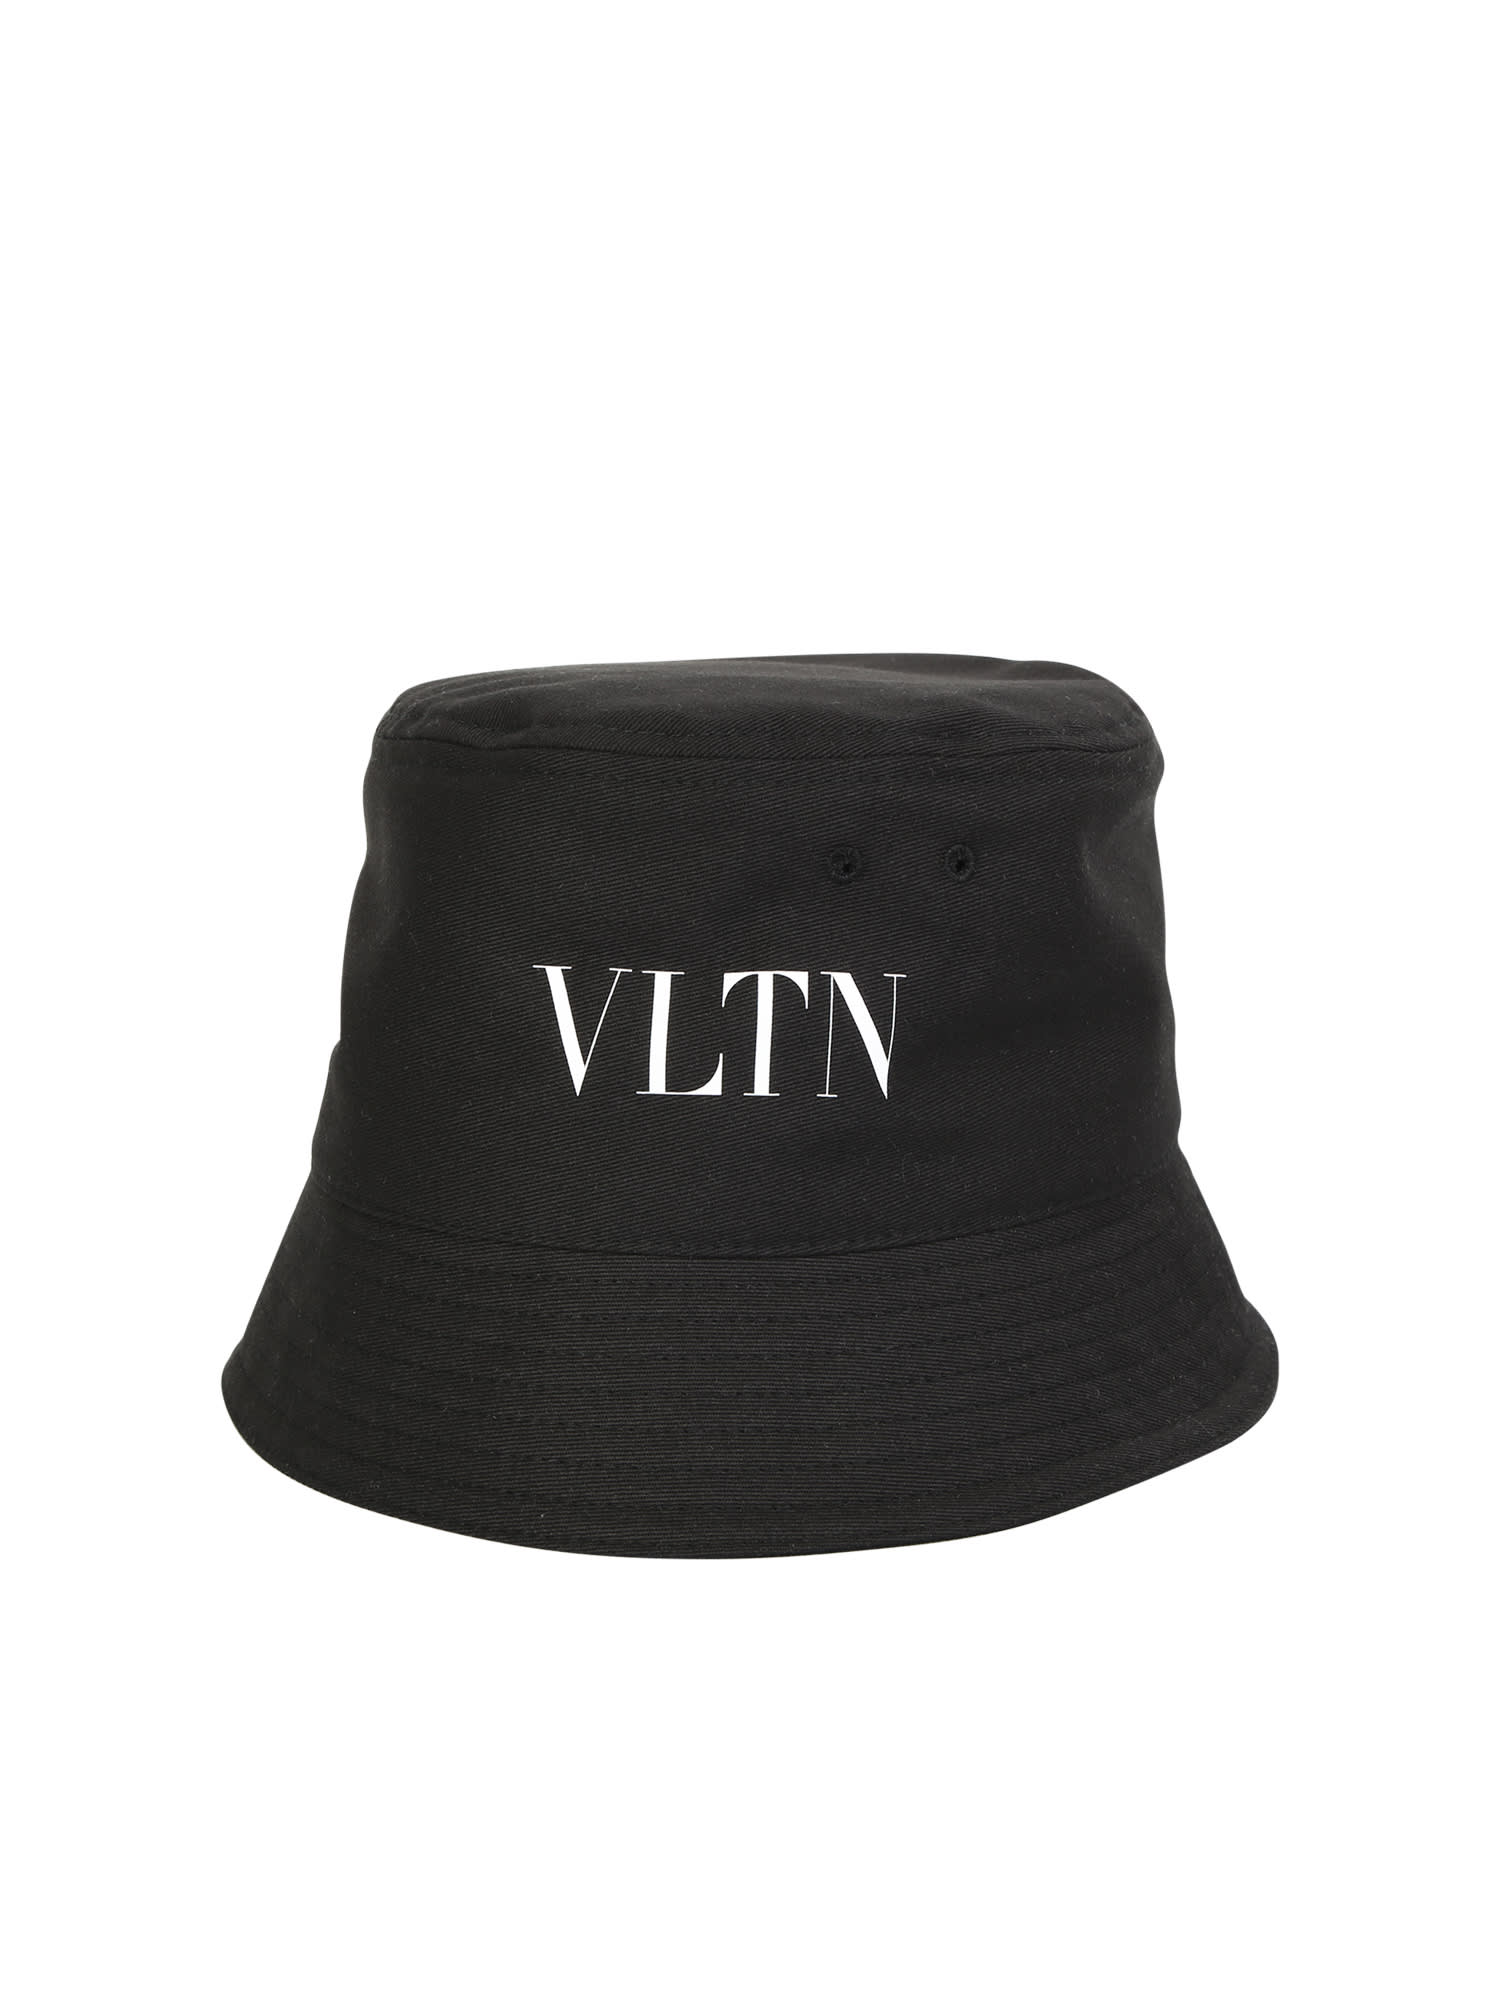 The Bucket Hat By Valentino Garavani Is A Trendy Accessory That Has Become Essential For The Most Authentic Looks